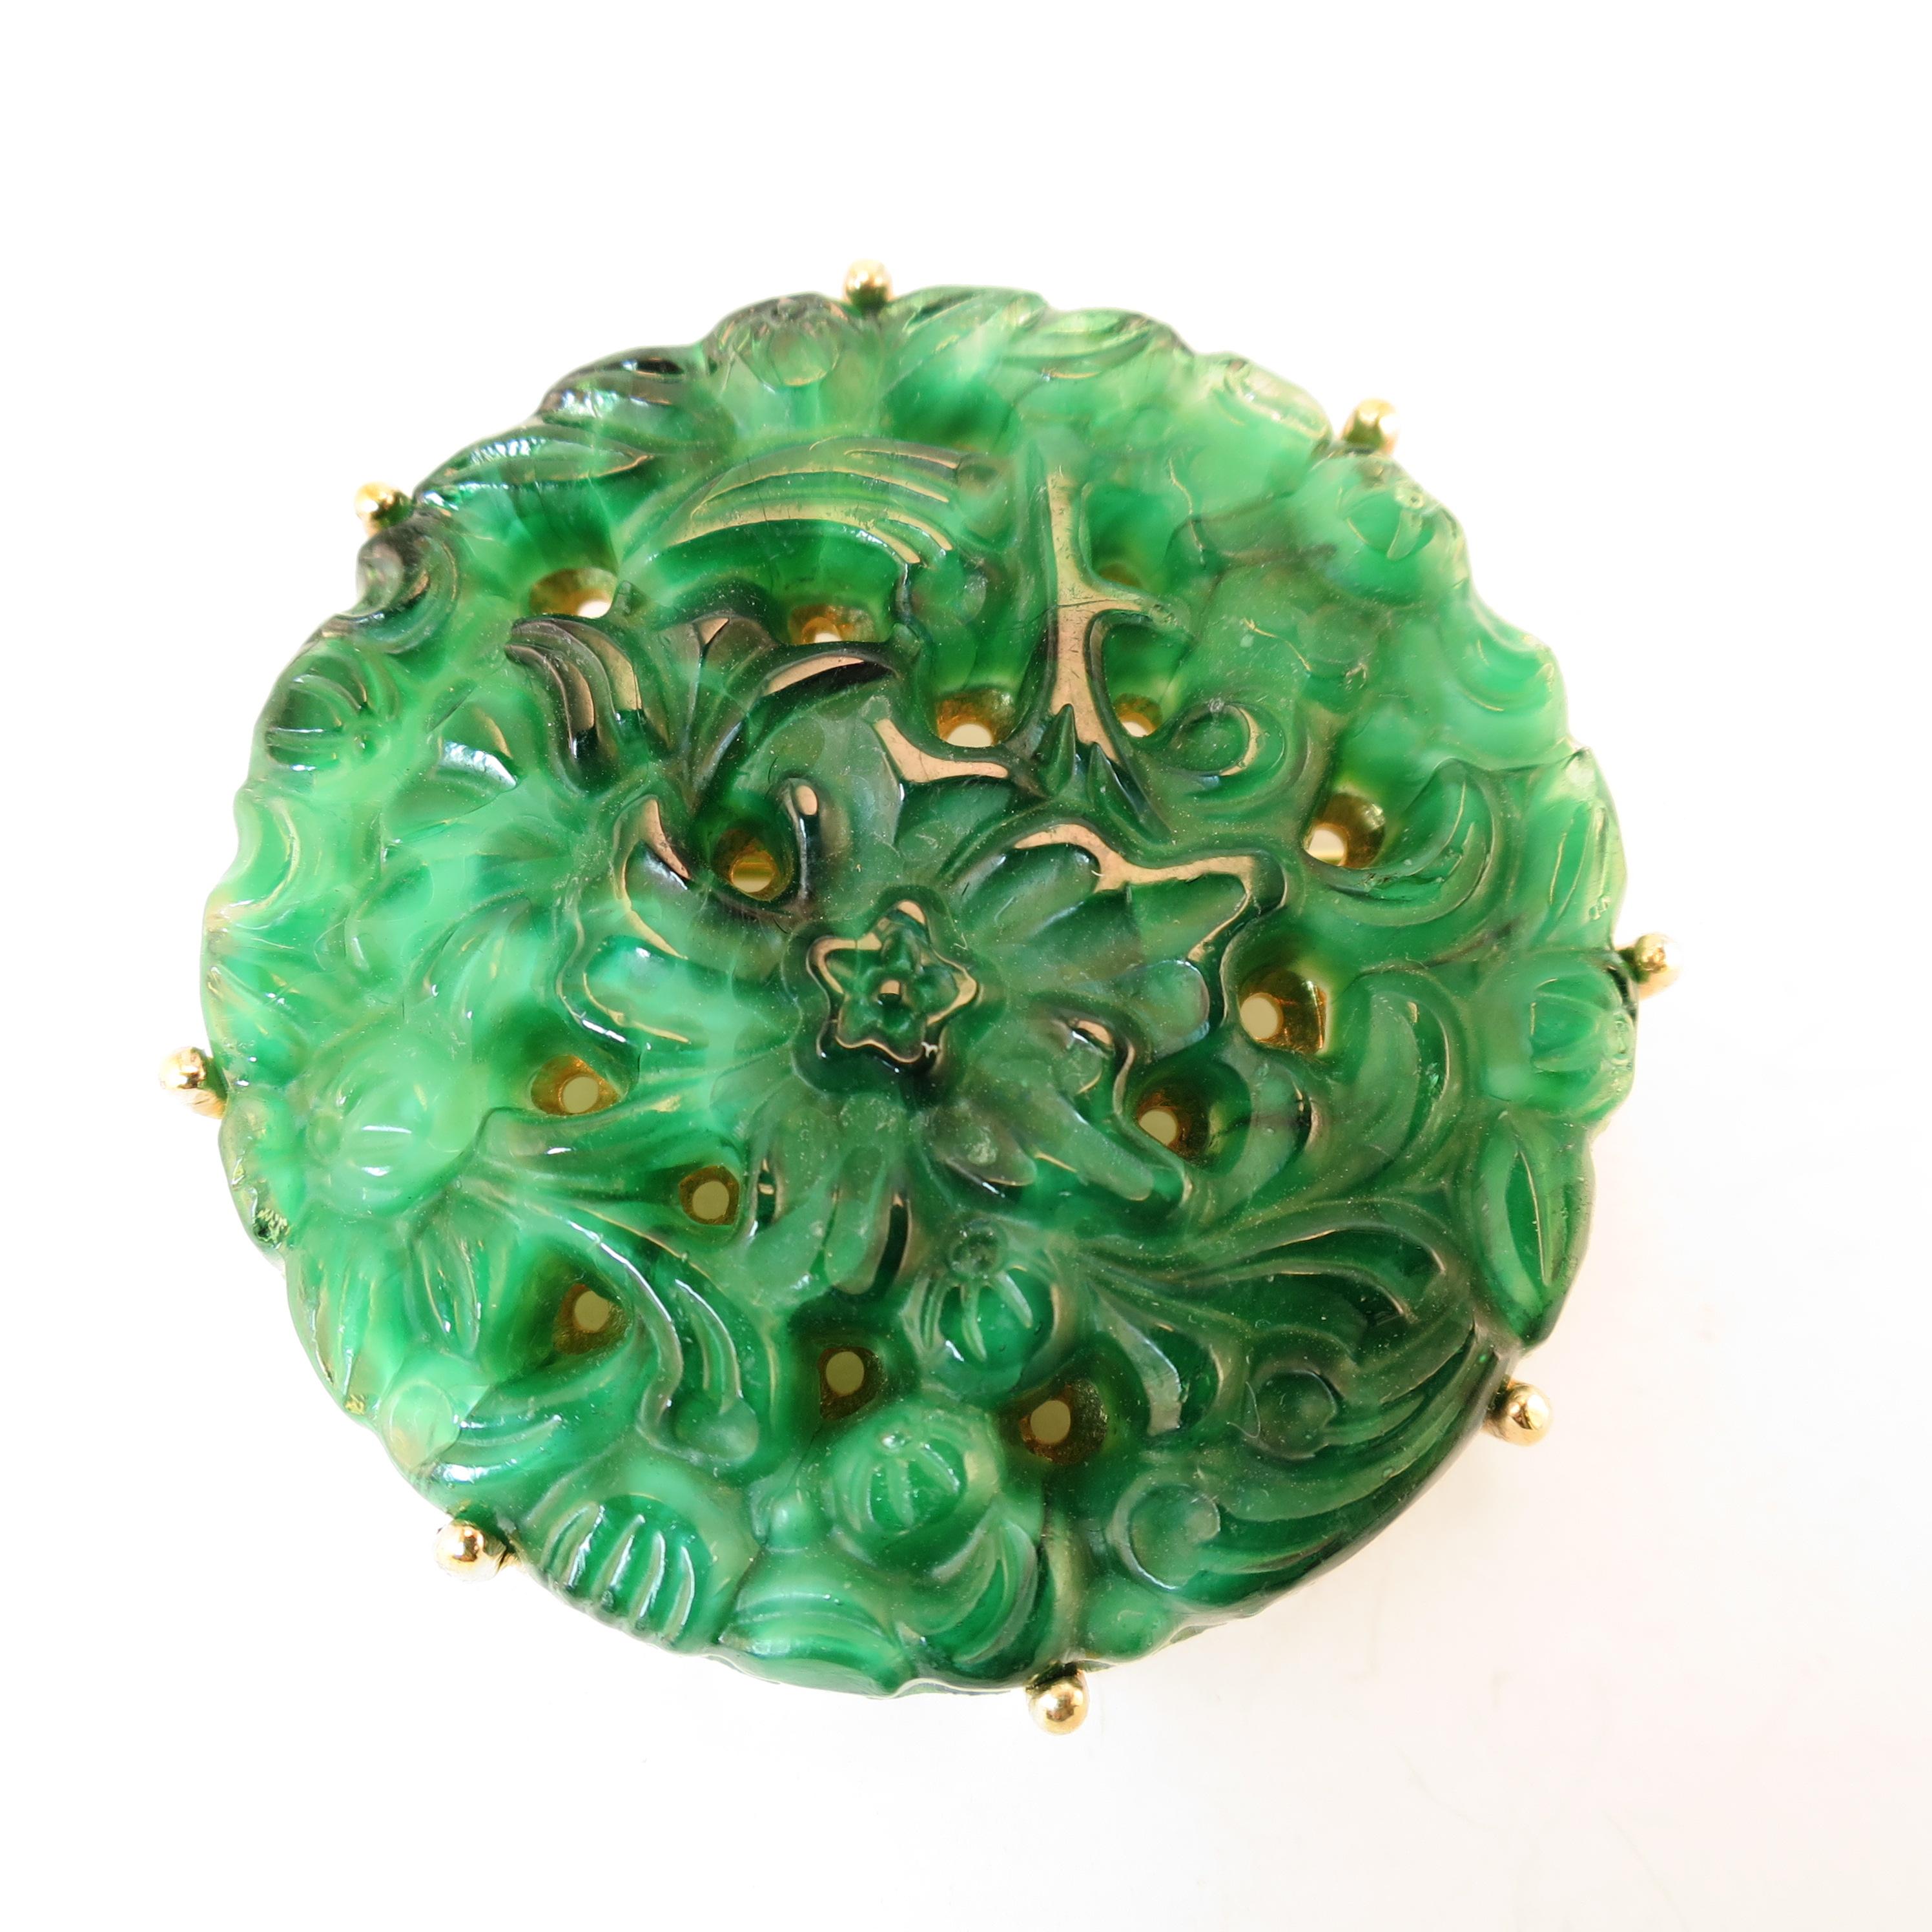 Offered here is a Ciner Asian-design jade glass gold-plated brooch and matching clip-back earrings from the 1950s. Thick circular discs of carved perforated glass in an Asian foliate design mimicking jade are prong-set on circular open-work